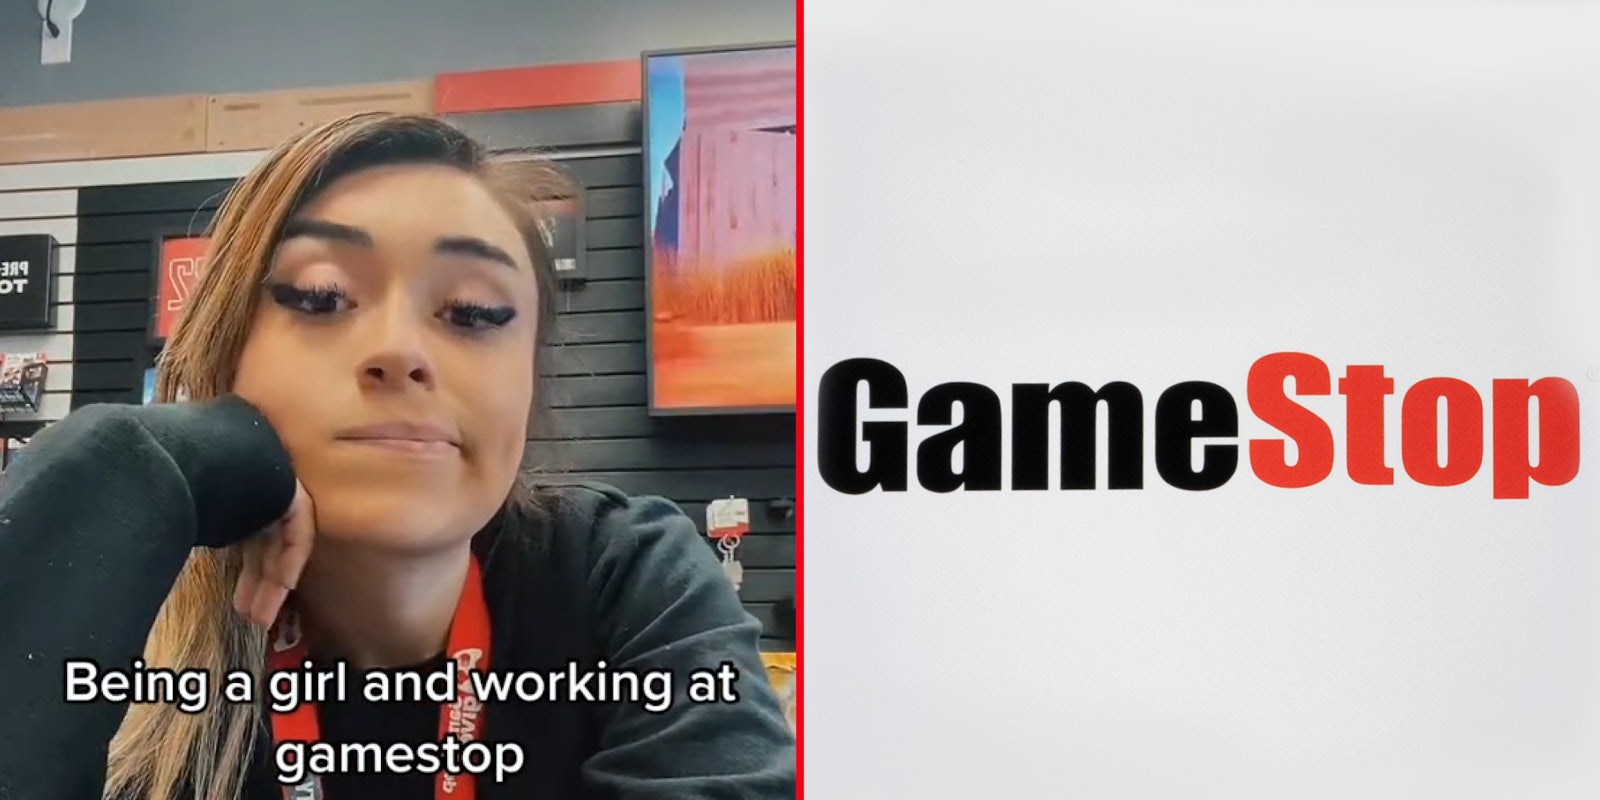 woman worker at gamestop caption 'Being a girl and working at gamestop' (l) GameStop logo red and black on white background (r)